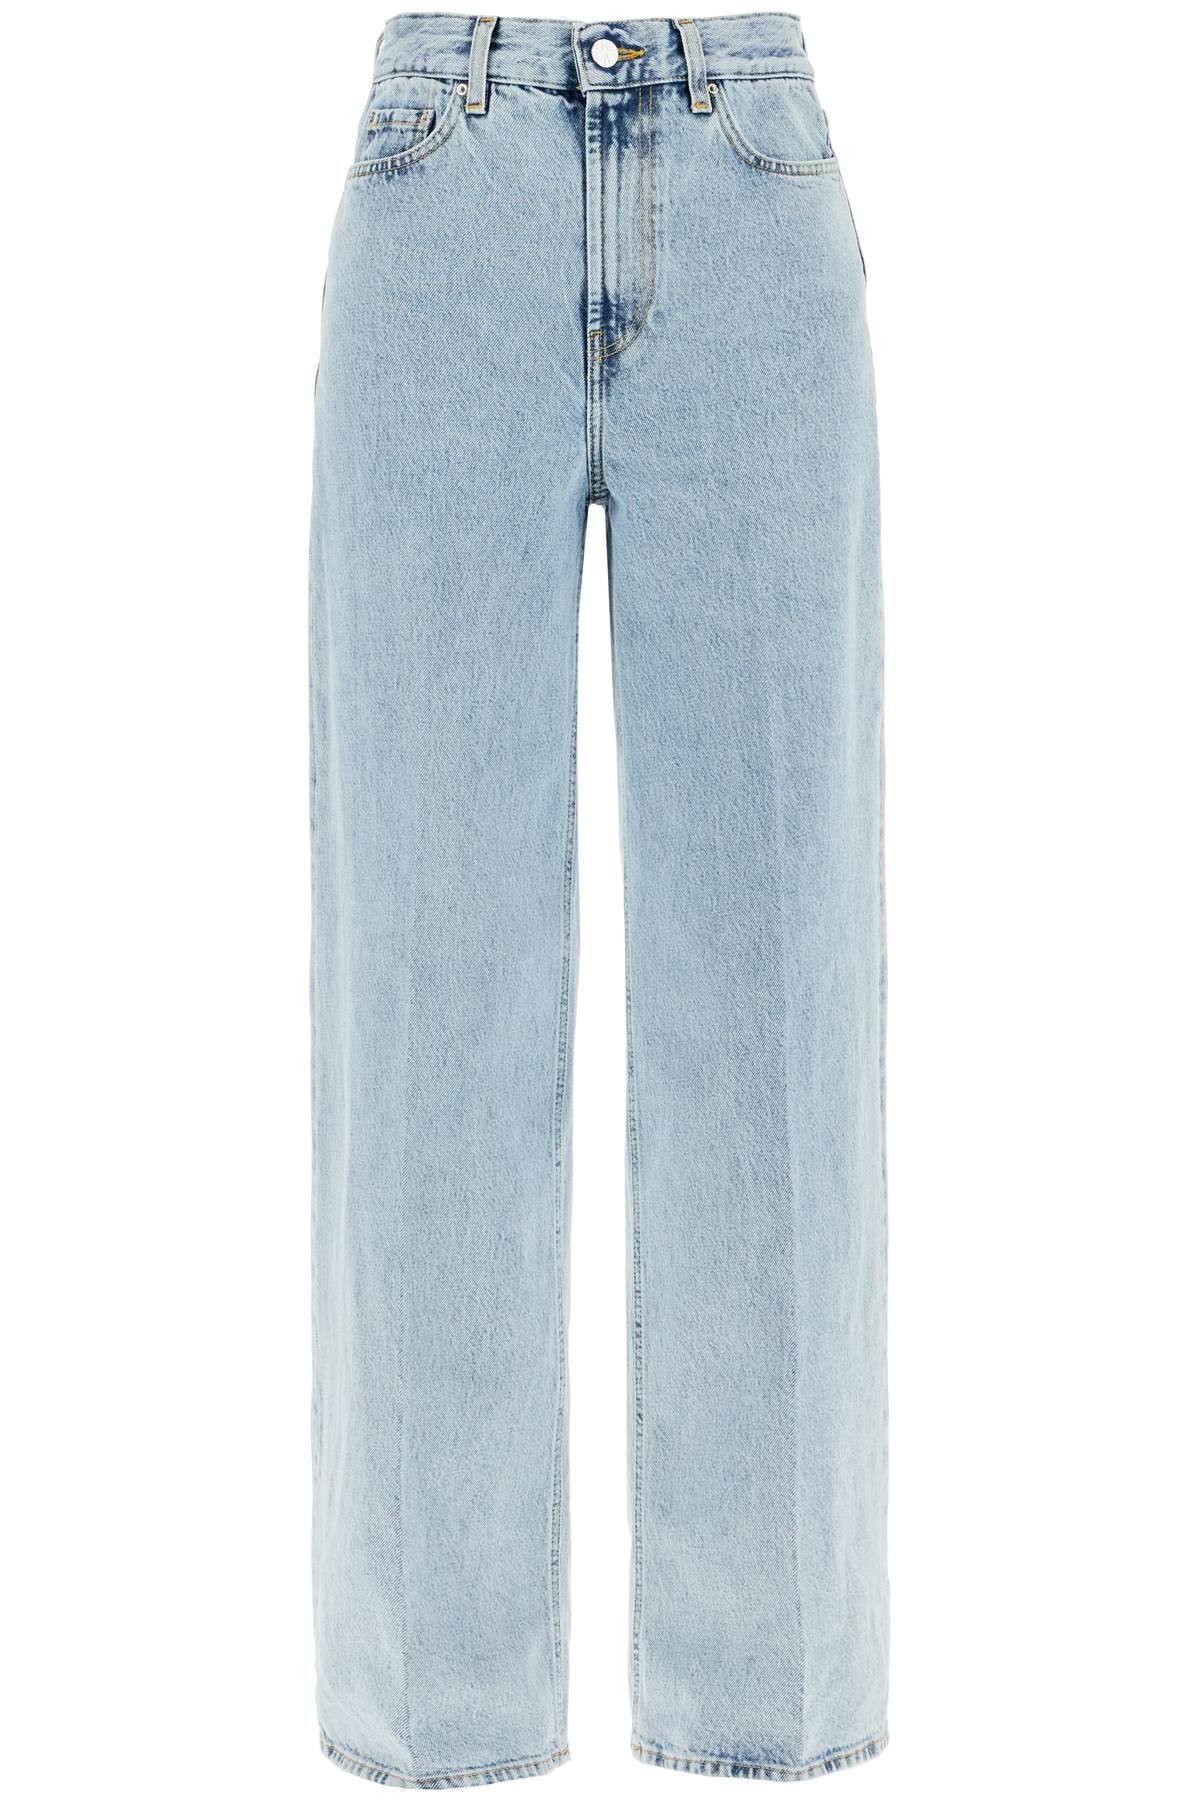 Toteme TOTEME wide leg jeans in organic cotton